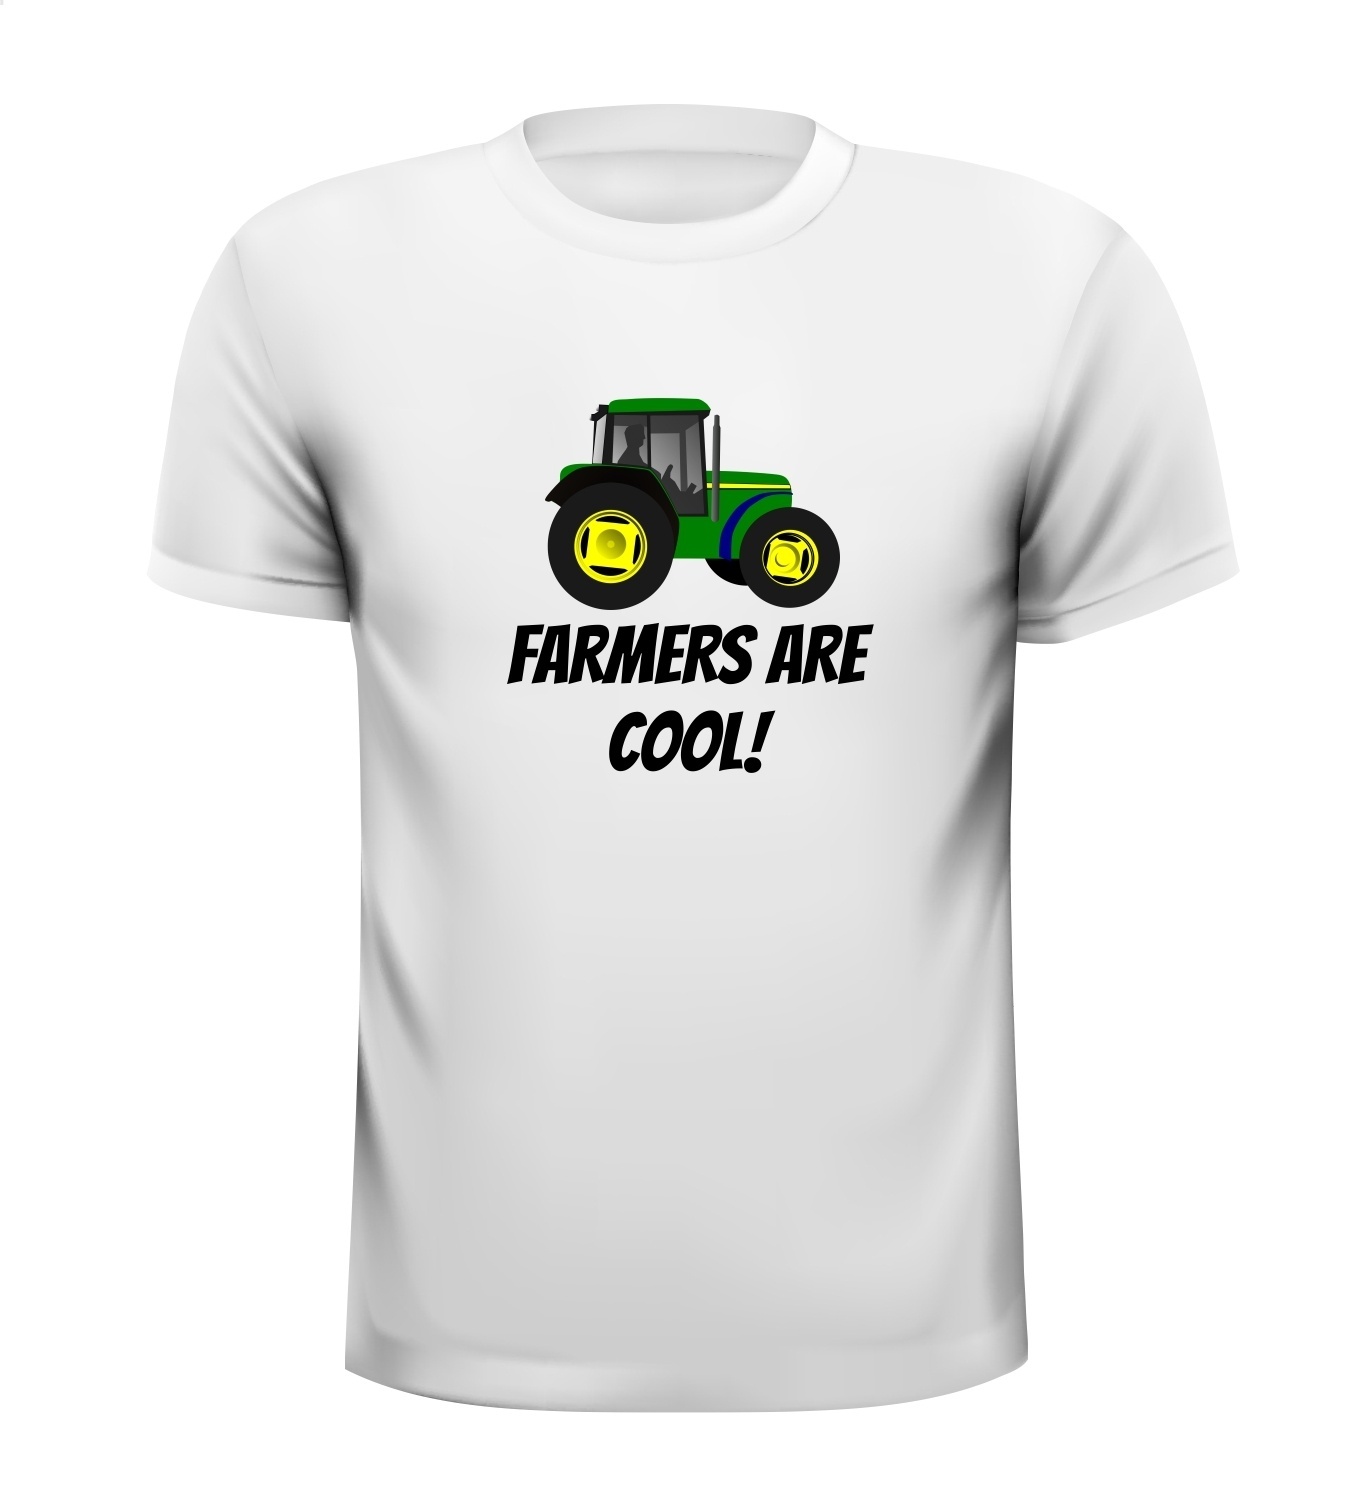 Farmers are cool T-shirt